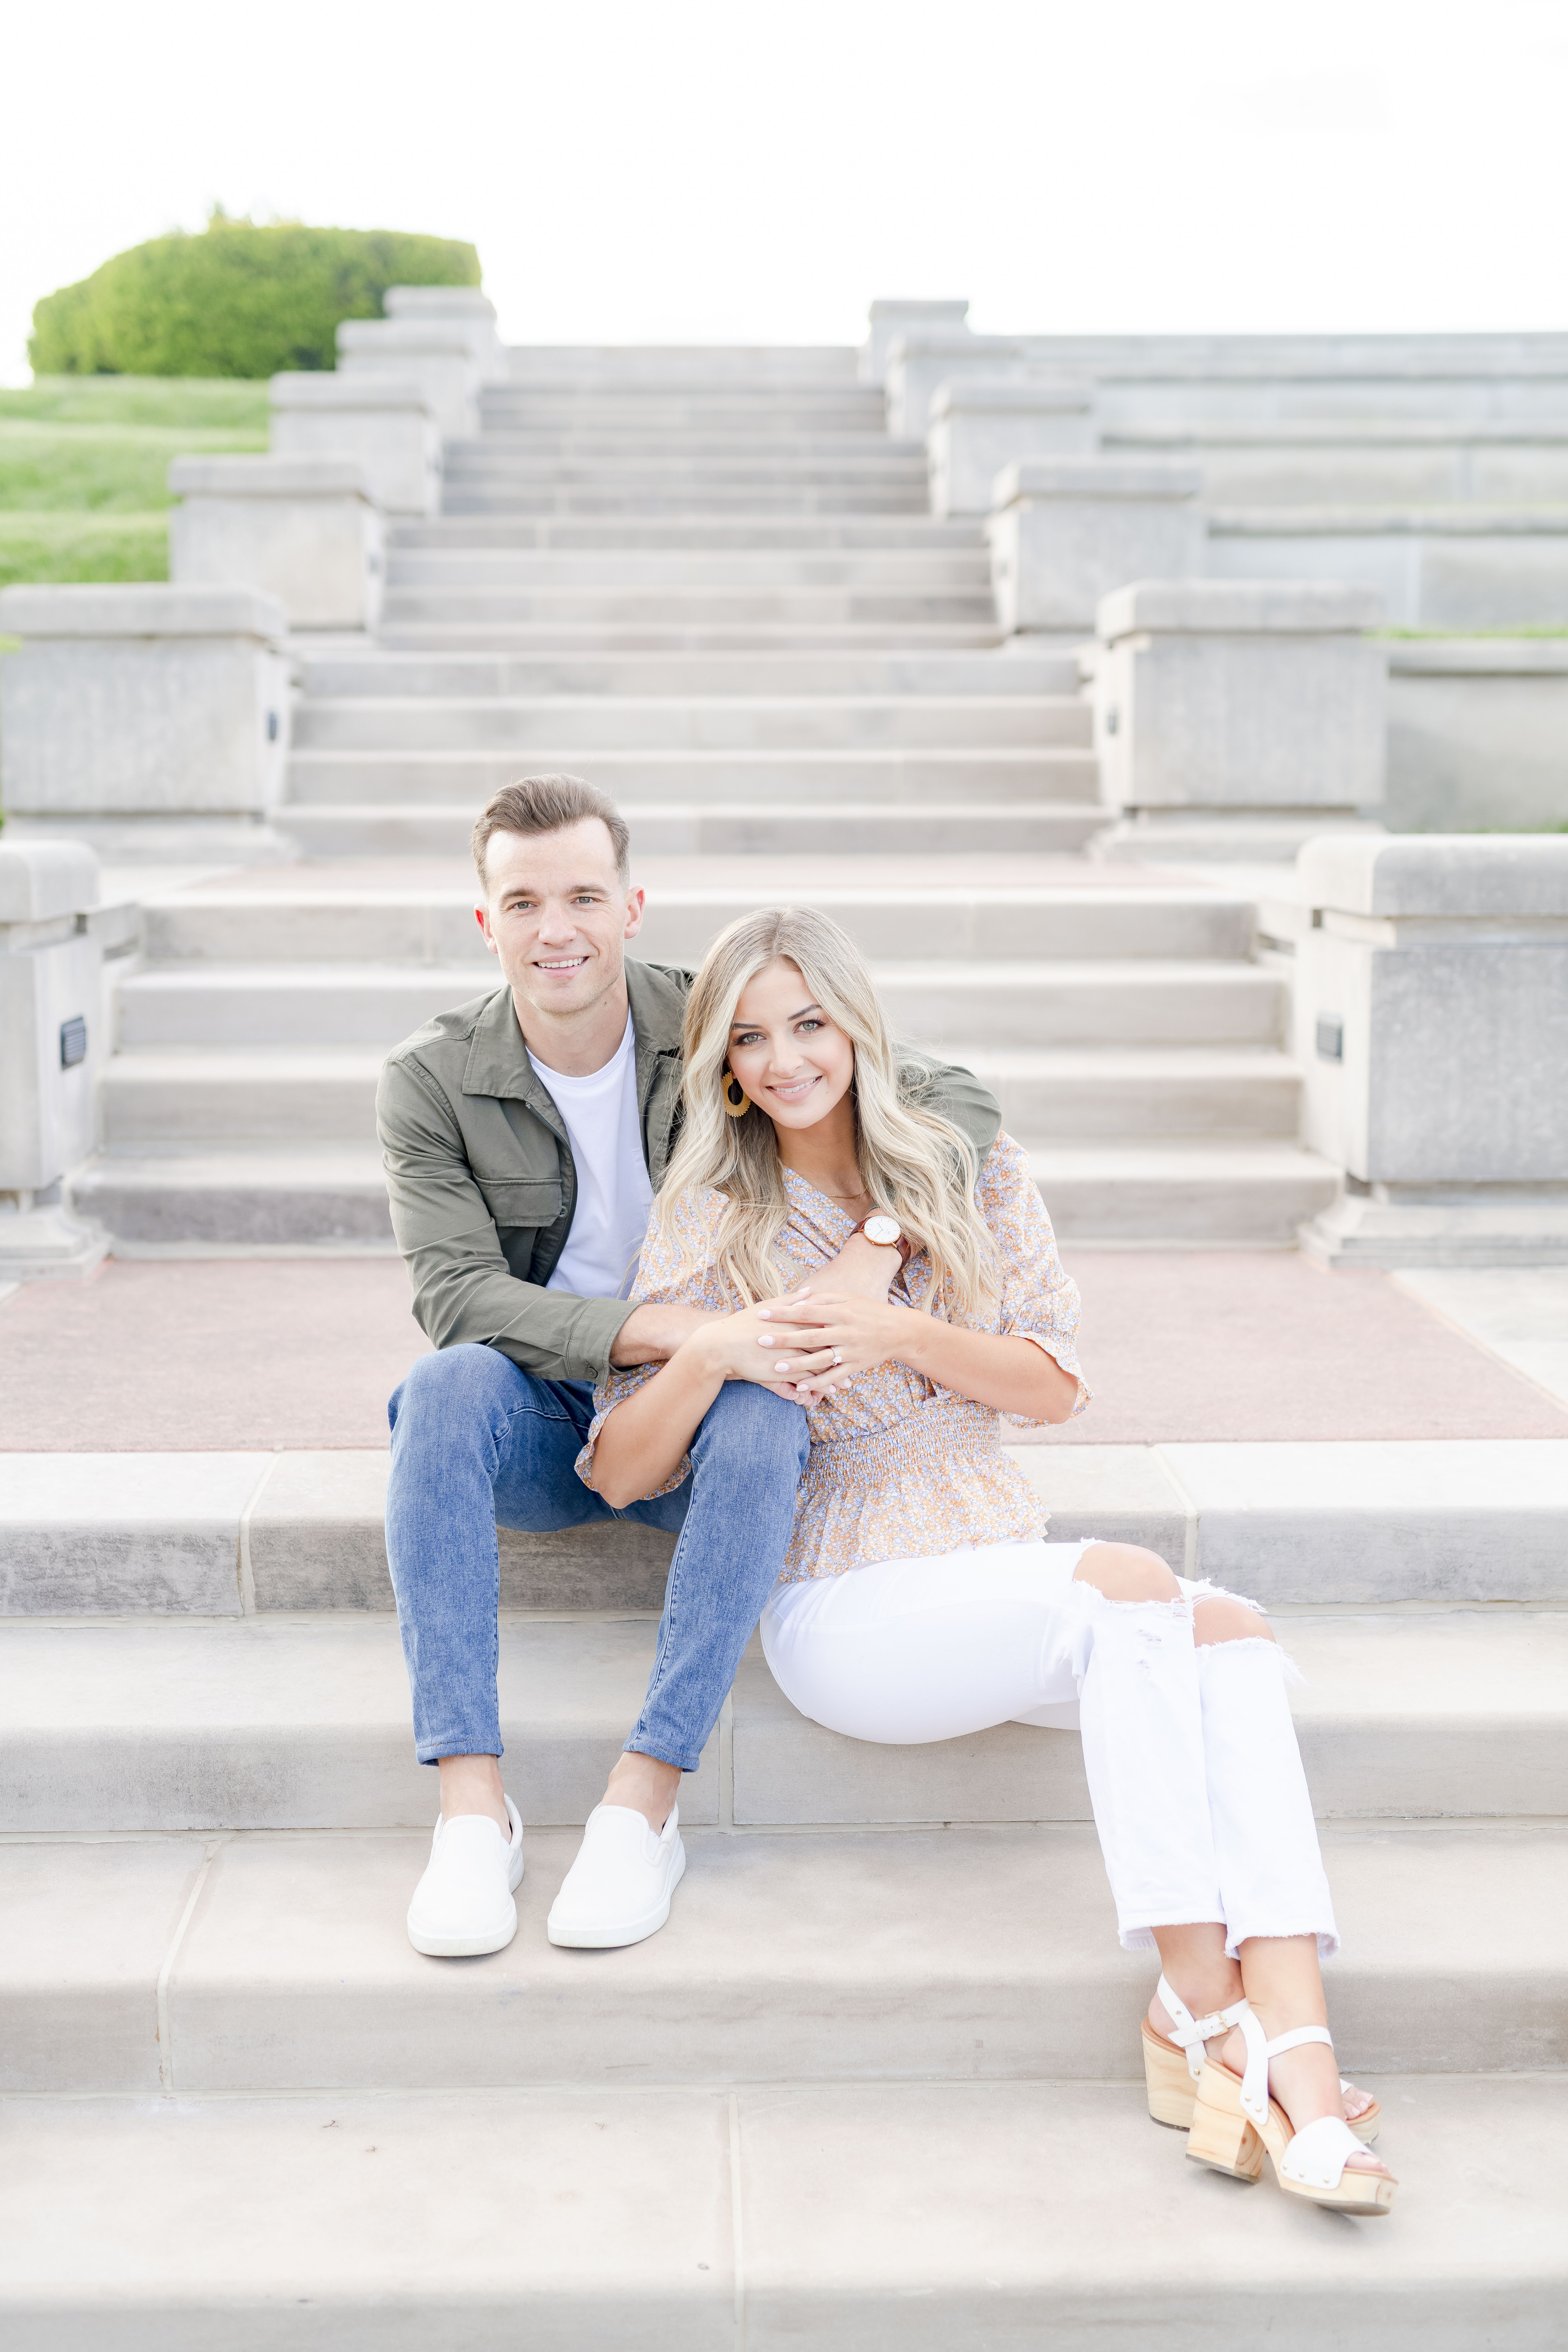 Couple posing for engagement portraits at Coxhall Gardens in Carmel, Indiana